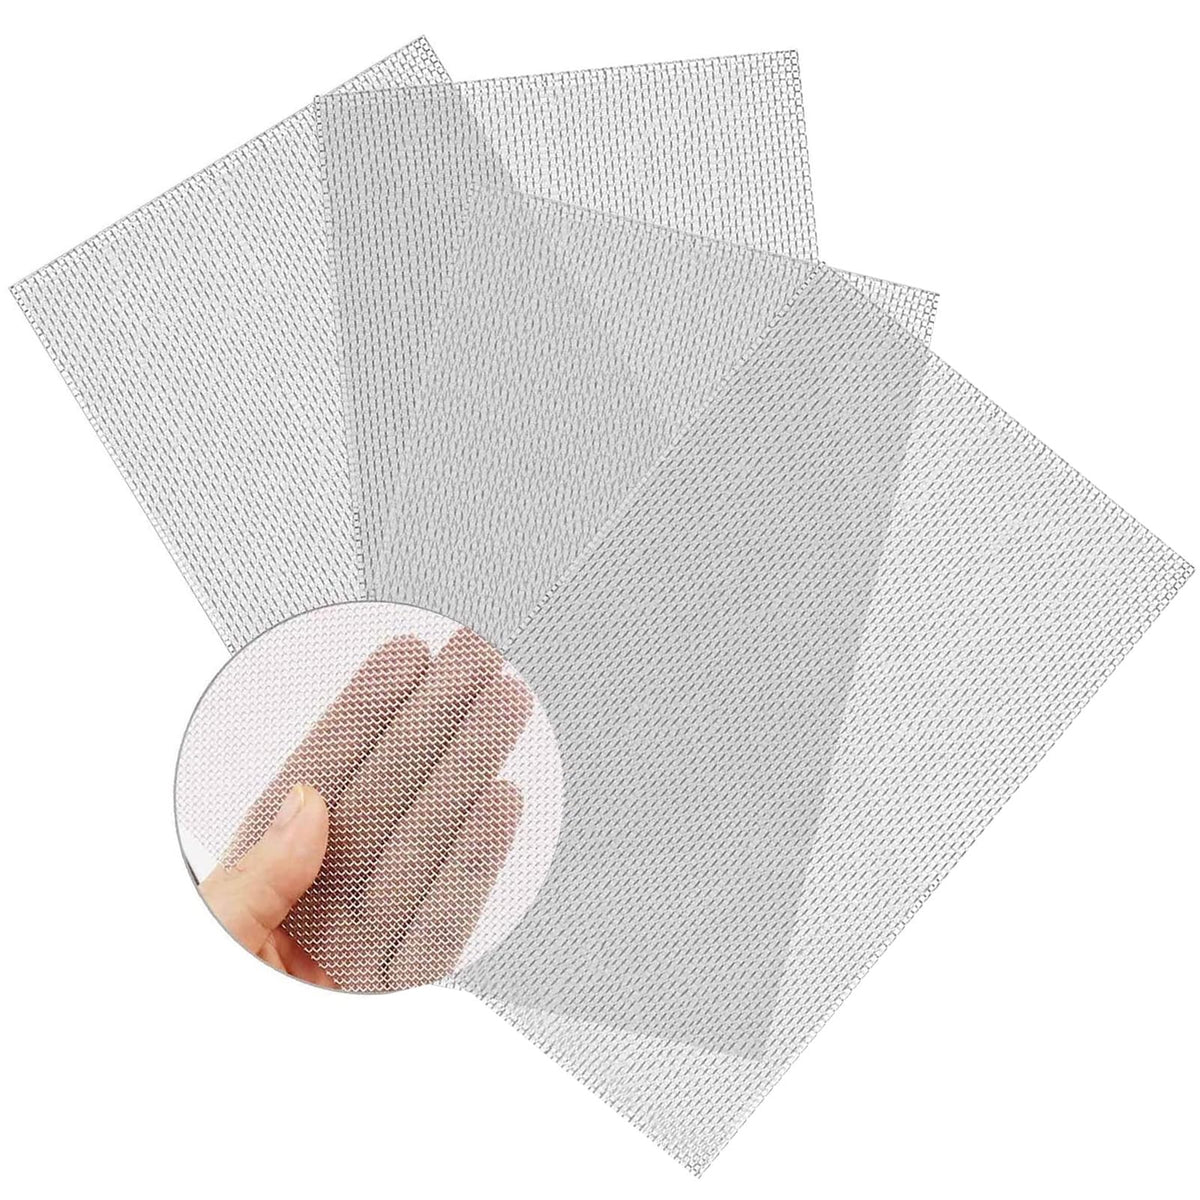 4 PCS Stainless Steel Woven Wire 20 Mesh Metal Mesh Sheet Rodent Control Insect Mesh Pest Proofing Mesh for Windows, Door, Filter, 12 x 8 Inches (300X 210mm)